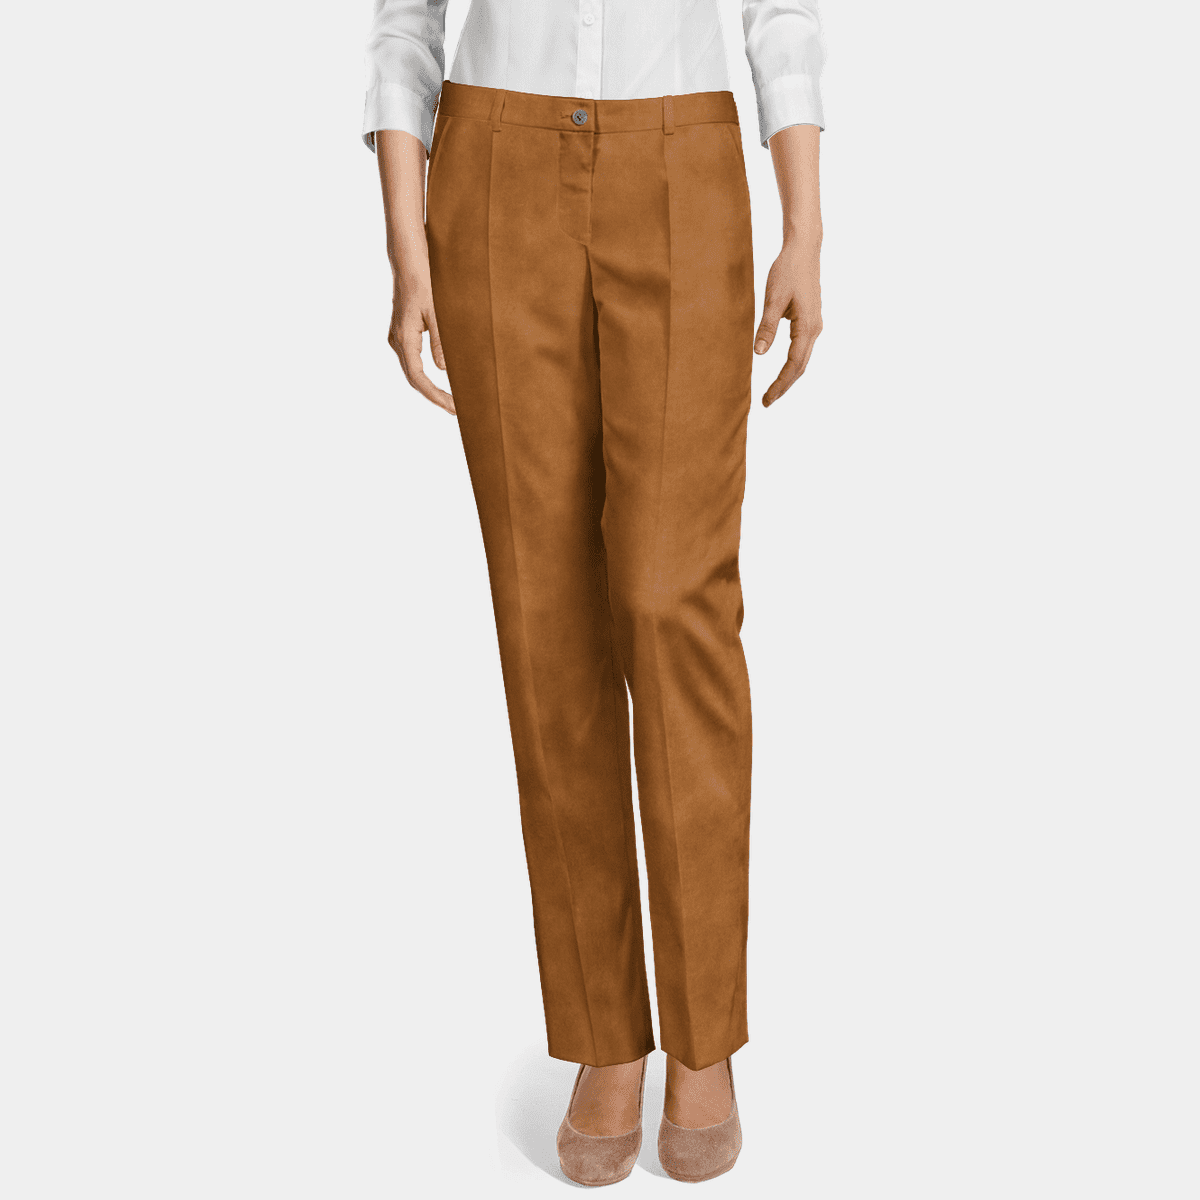   Essentials Women's Stretch Chino Ankle Length Pant  (Previously Goodthreads), Camel, X-Small : Clothing, Shoes & Jewelry